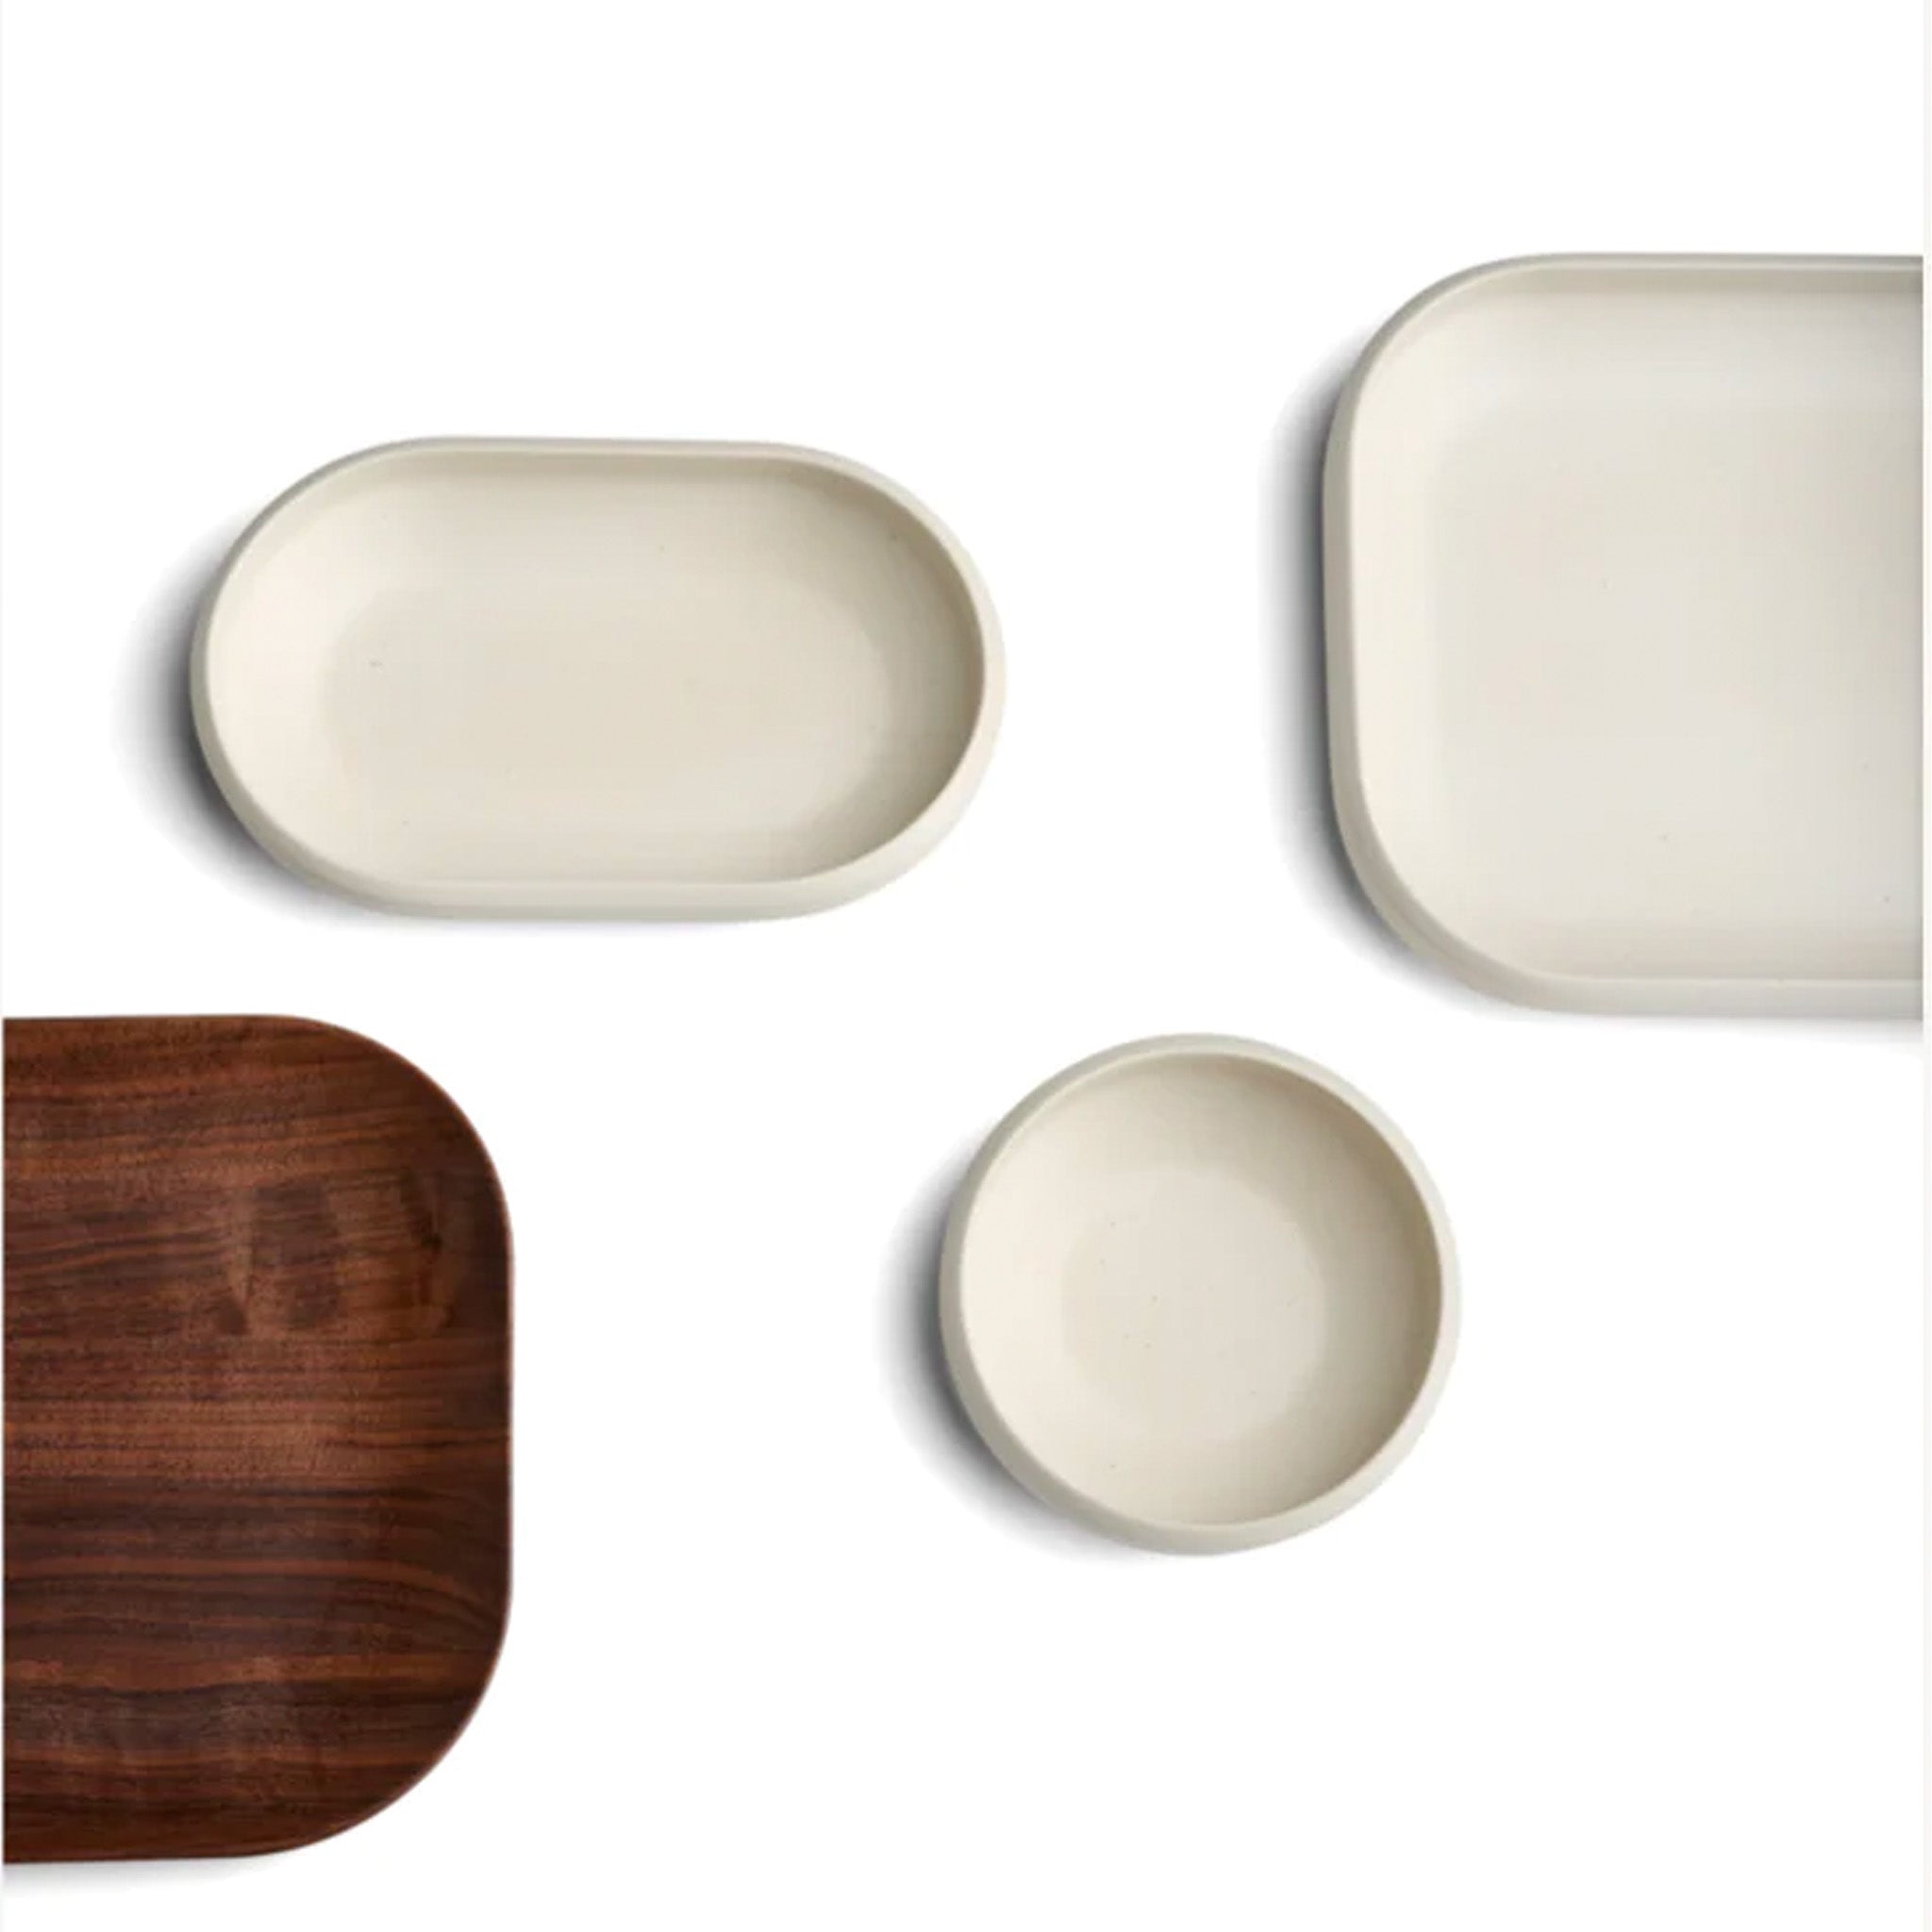 Ceramic Oven Dish With Lid by John Pawson for When Objects Work